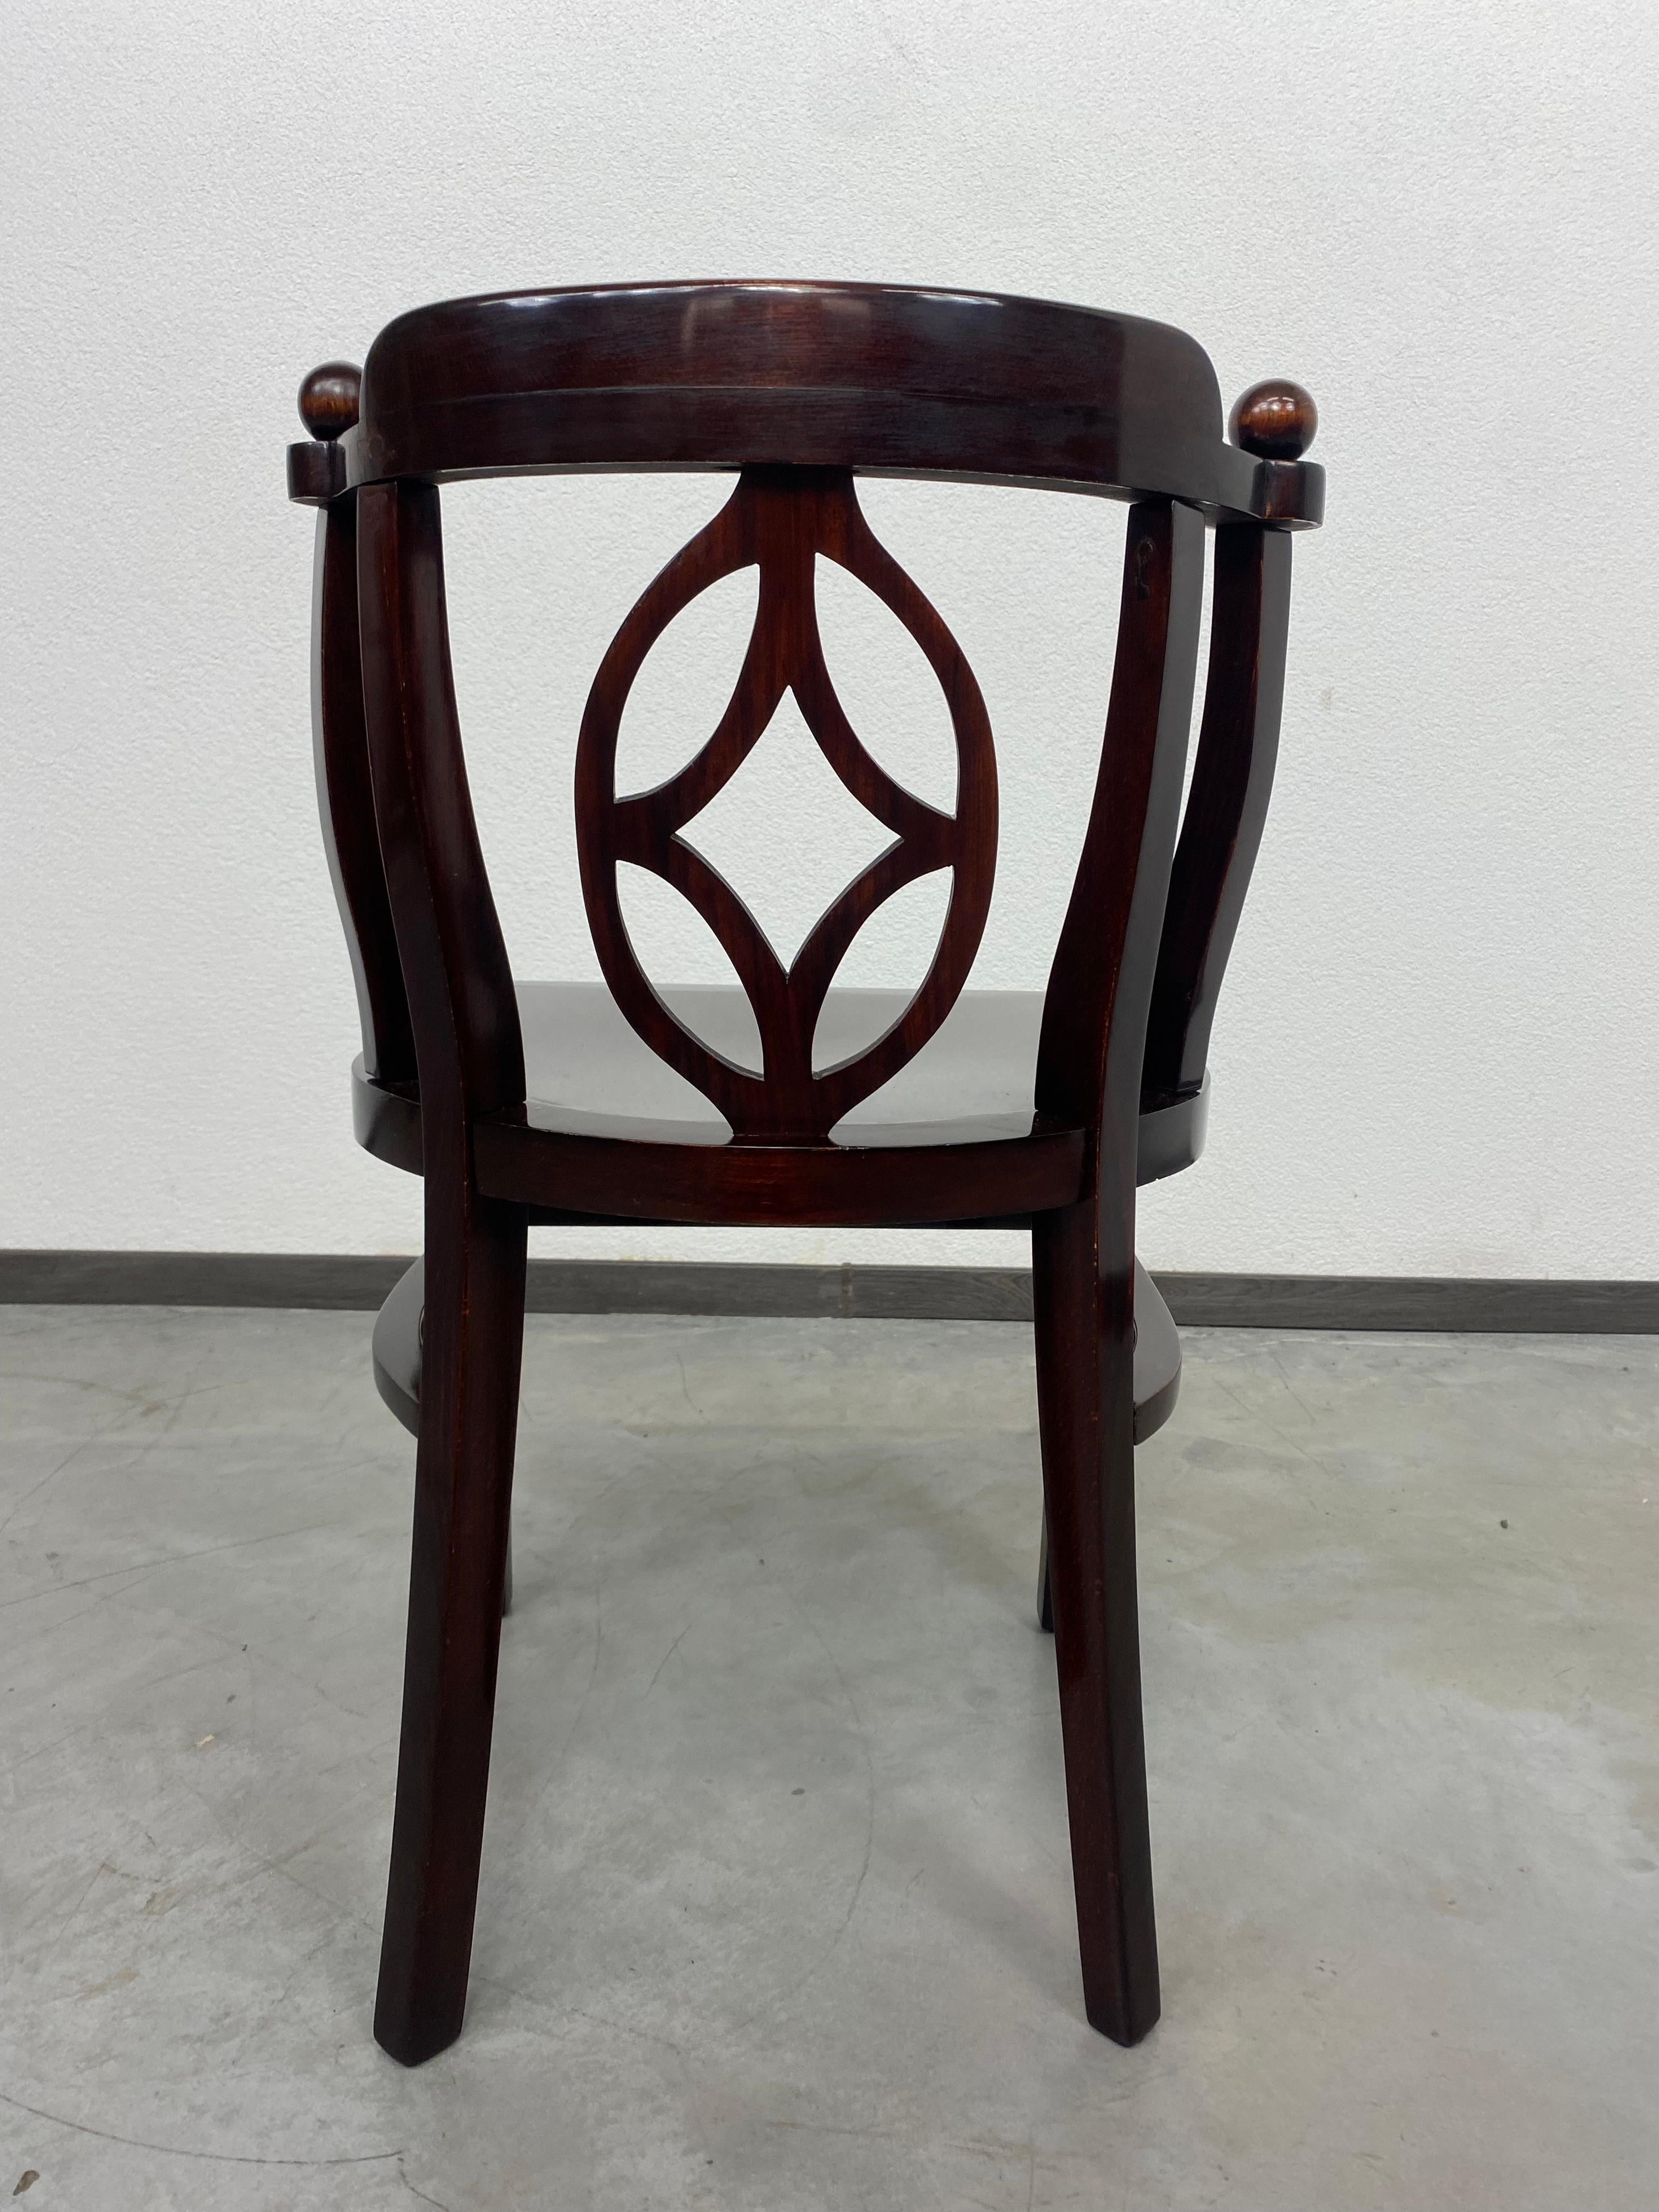 Secession chair atr. Kolo Moser In Excellent Condition For Sale In Banská Štiavnica, SK